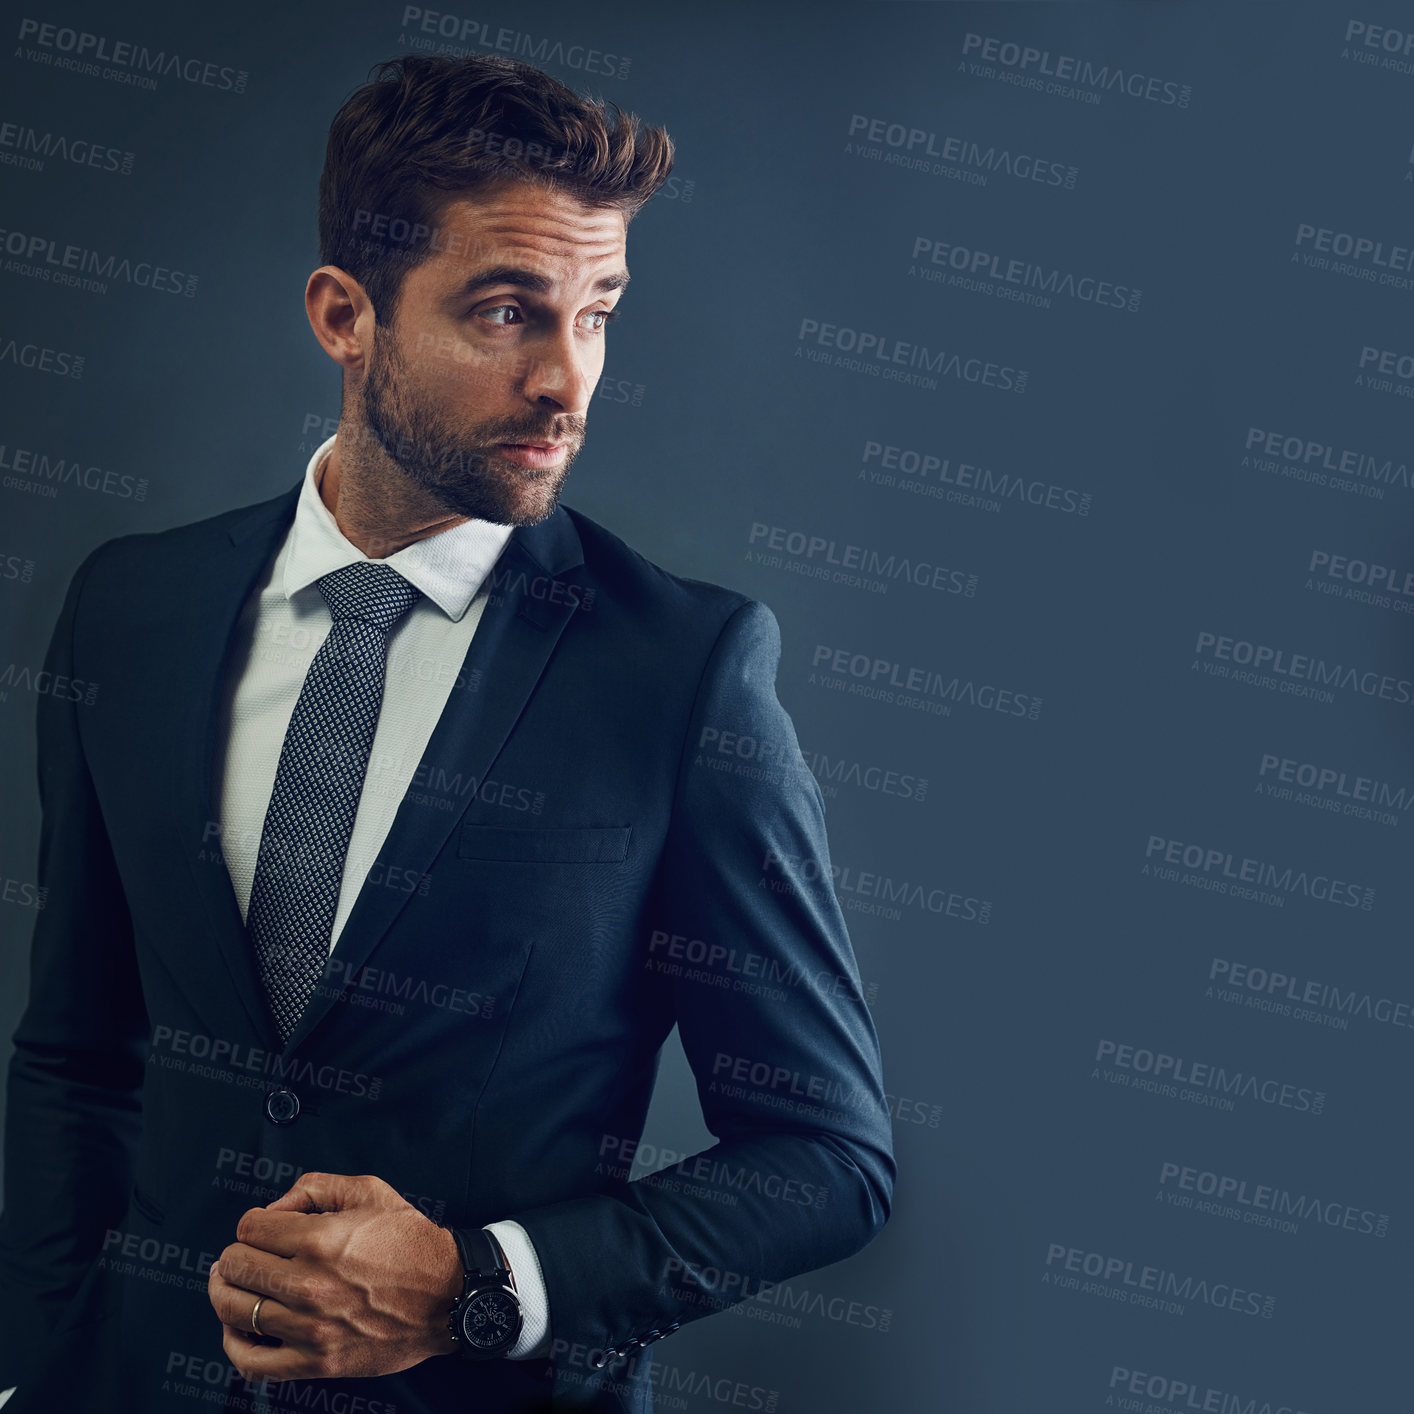 Buy stock photo Studio shot of a handsome young businessman posing against a dark background